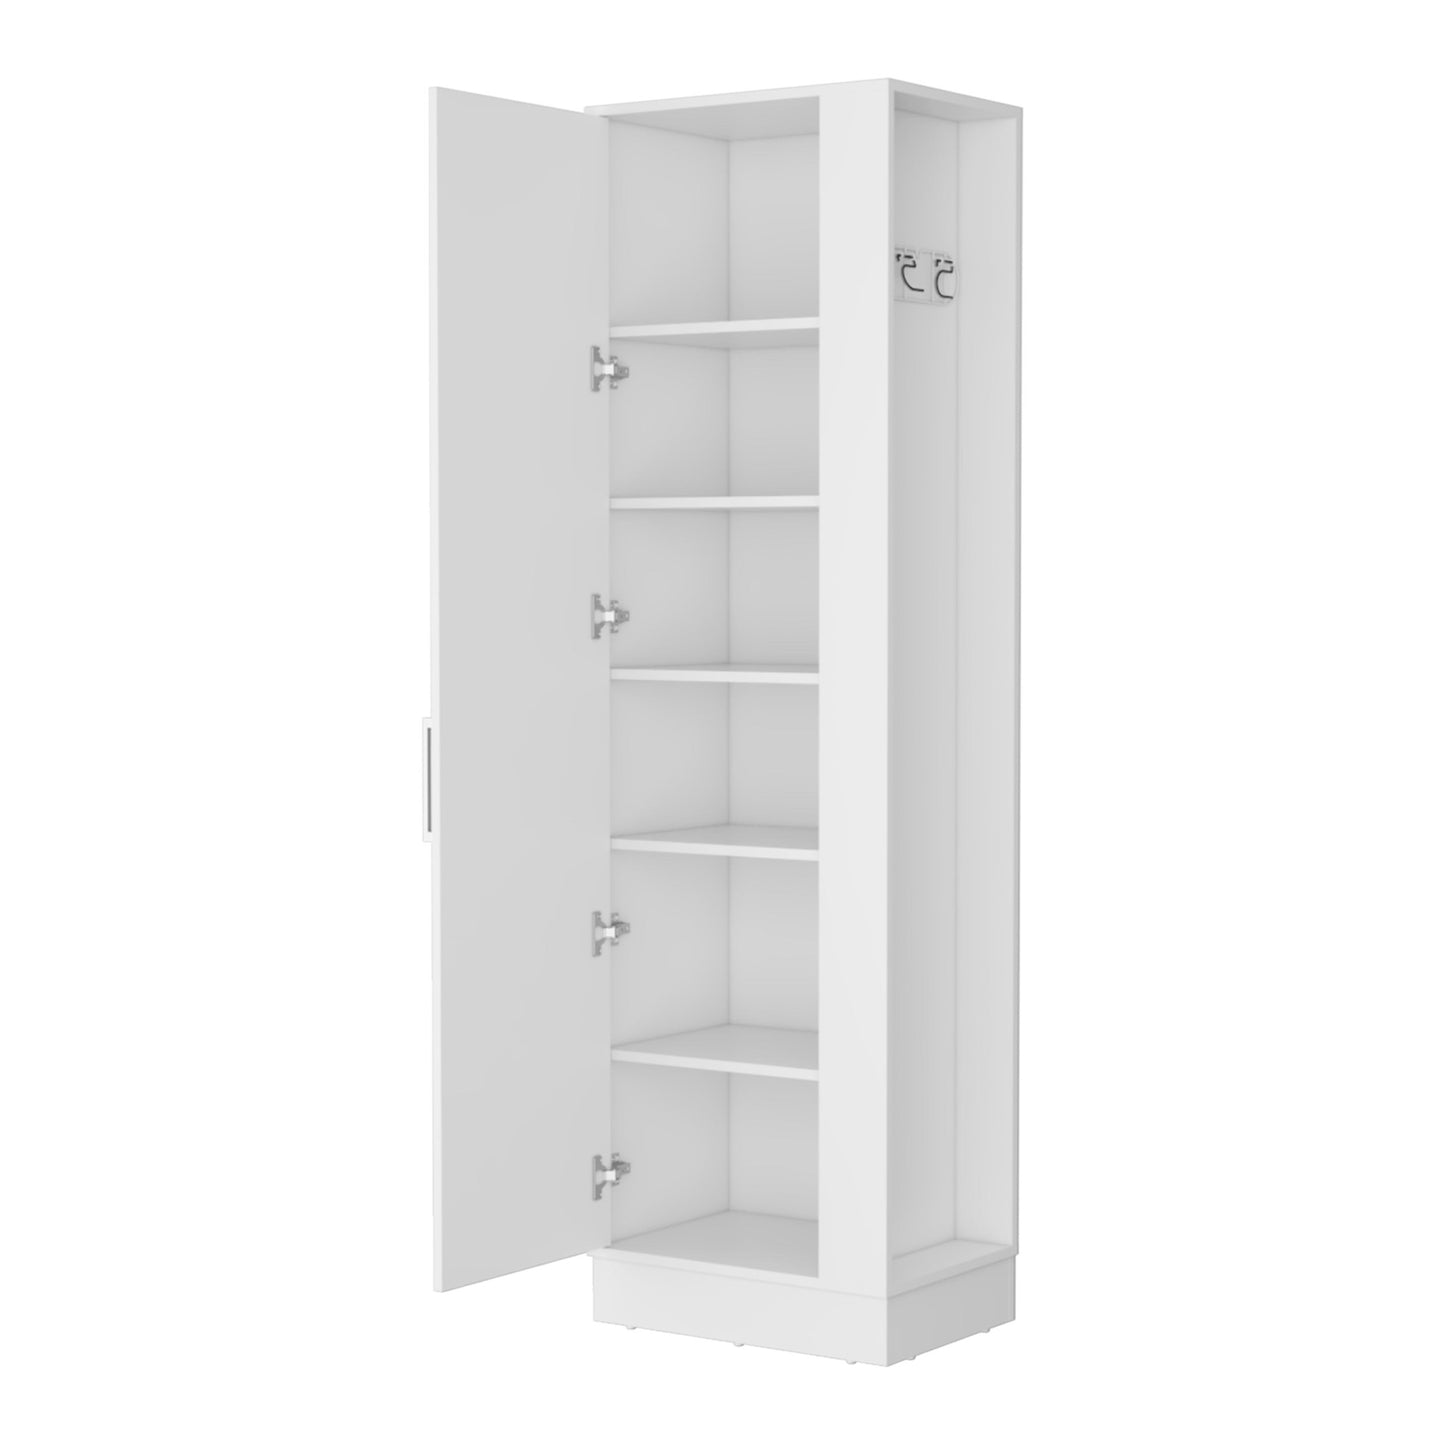 21" White Accent Cabinet With Six Shelves